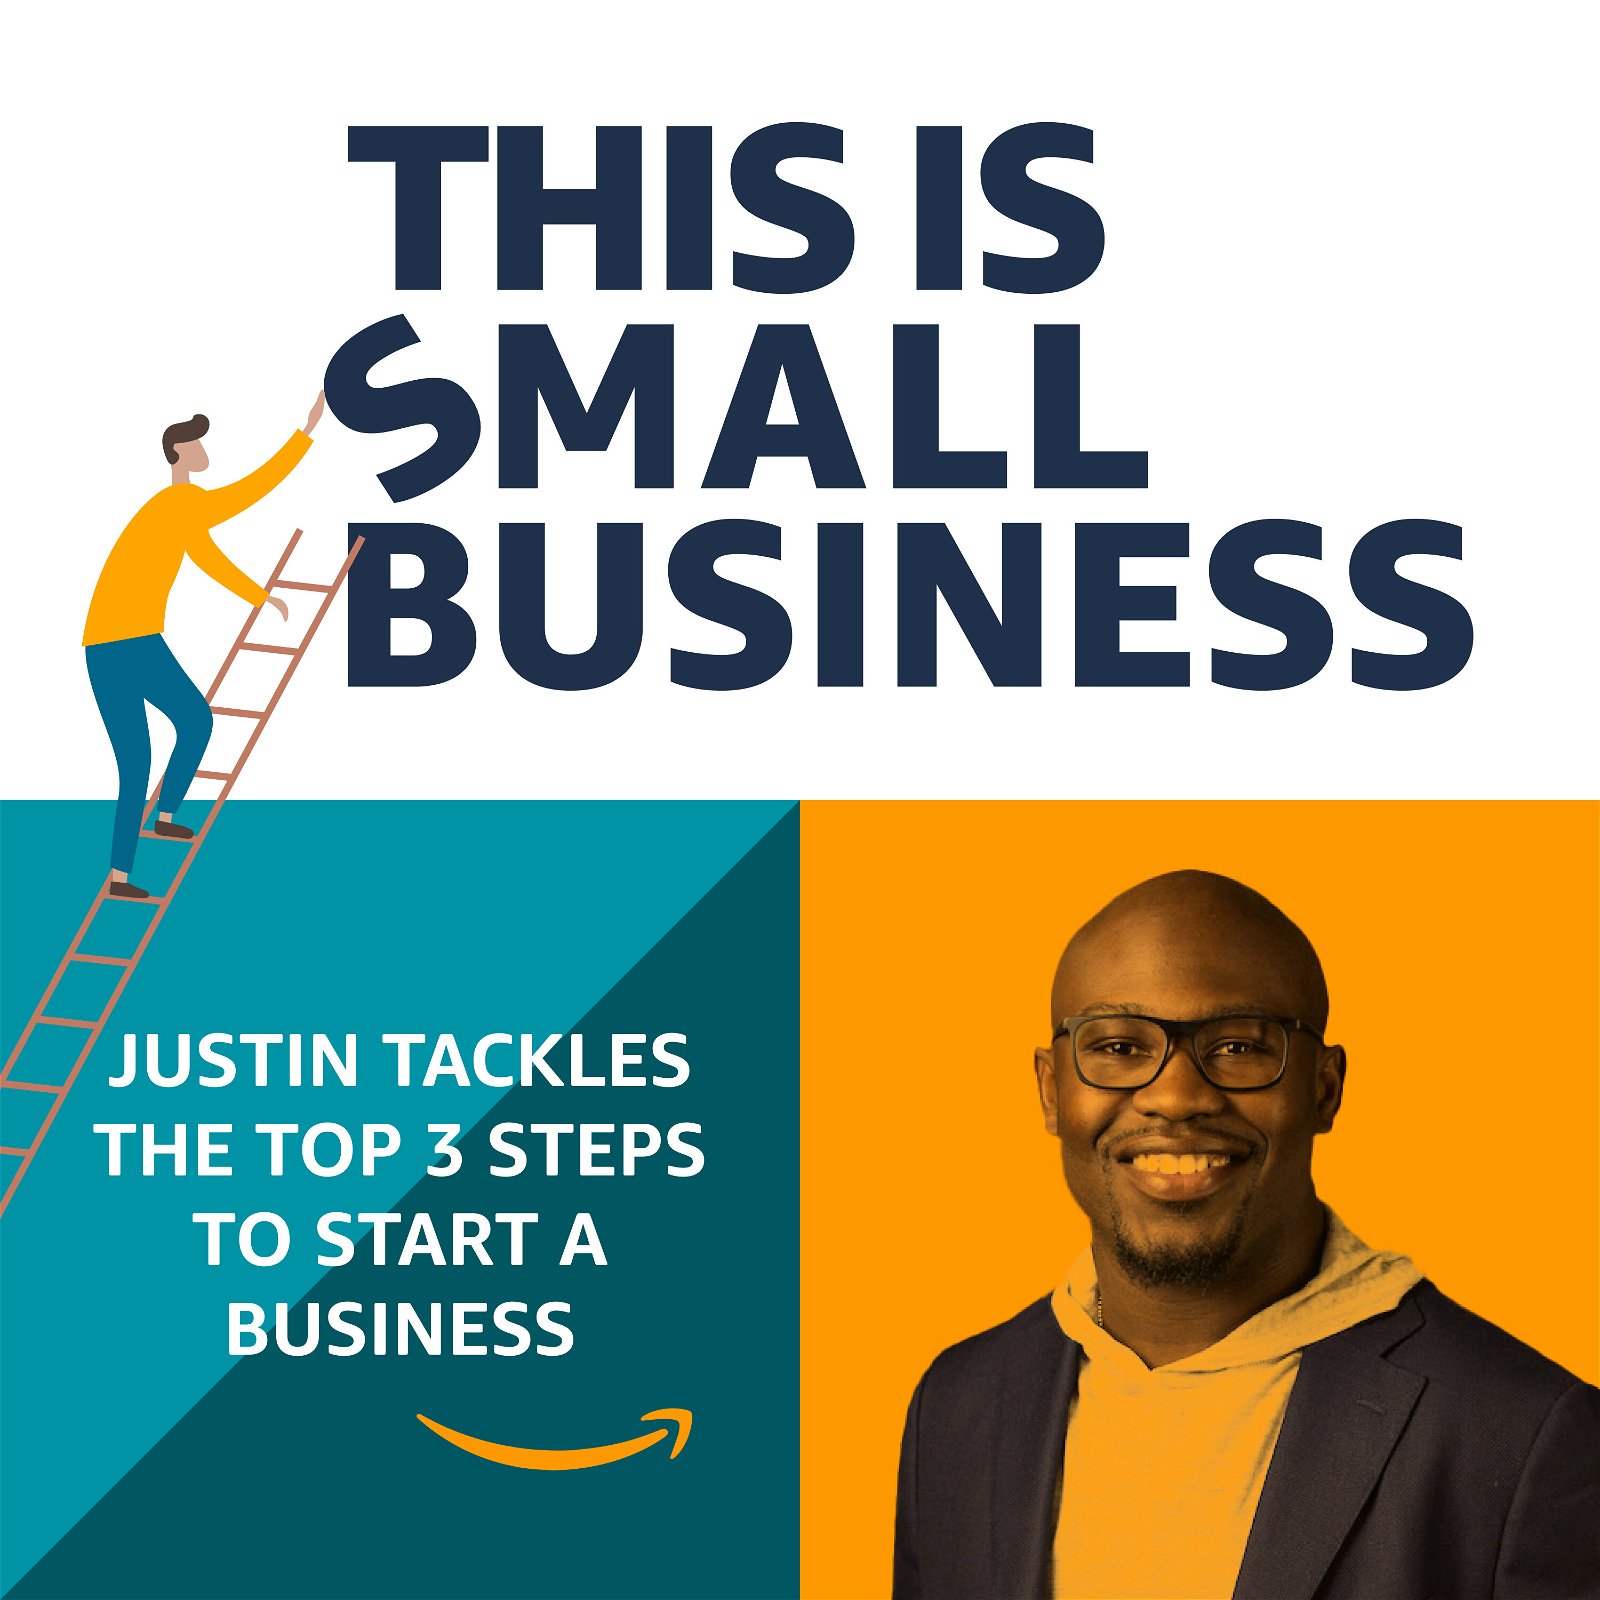 Justin Tackles the Top 3 Steps to Start a Business